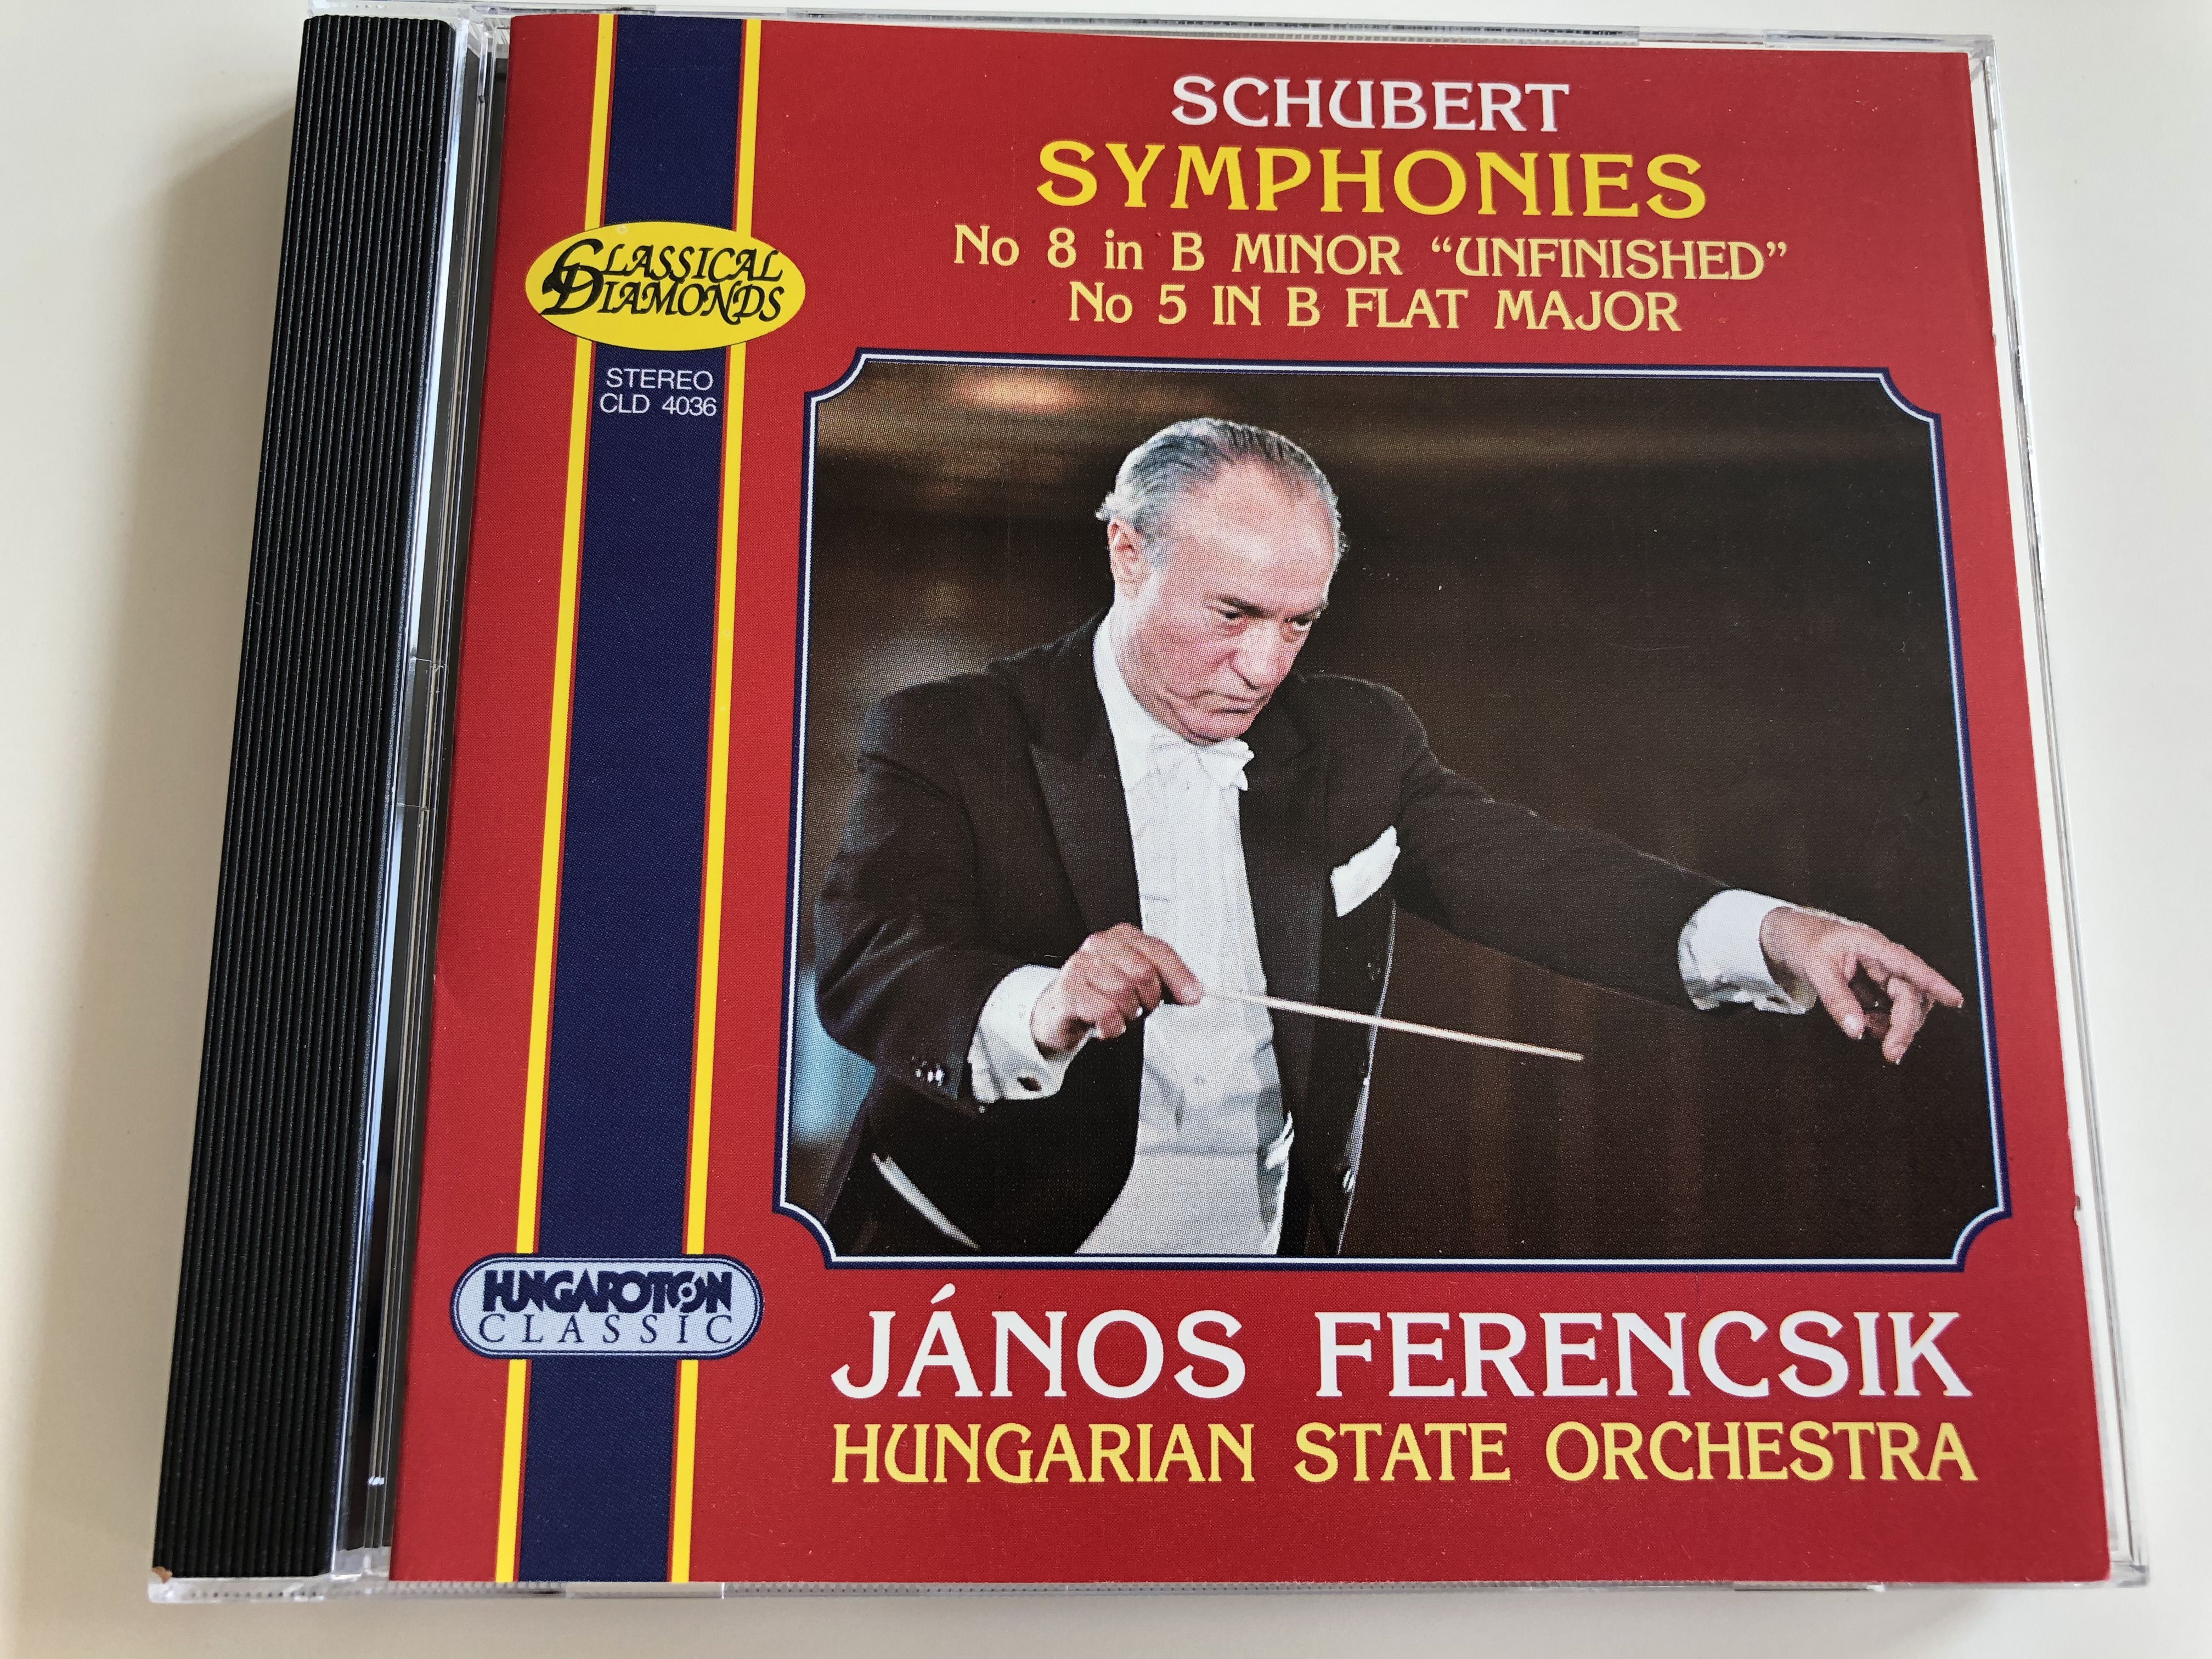 -schubert-symphonies-no.-8-in-b-minor-unfinished-no.-5-in-b-flat-major-hungarian-state-orchestra-j-nos-ferencsik-hungaroton-classic-cld-4036-audio-cd-1997-1-.jpg